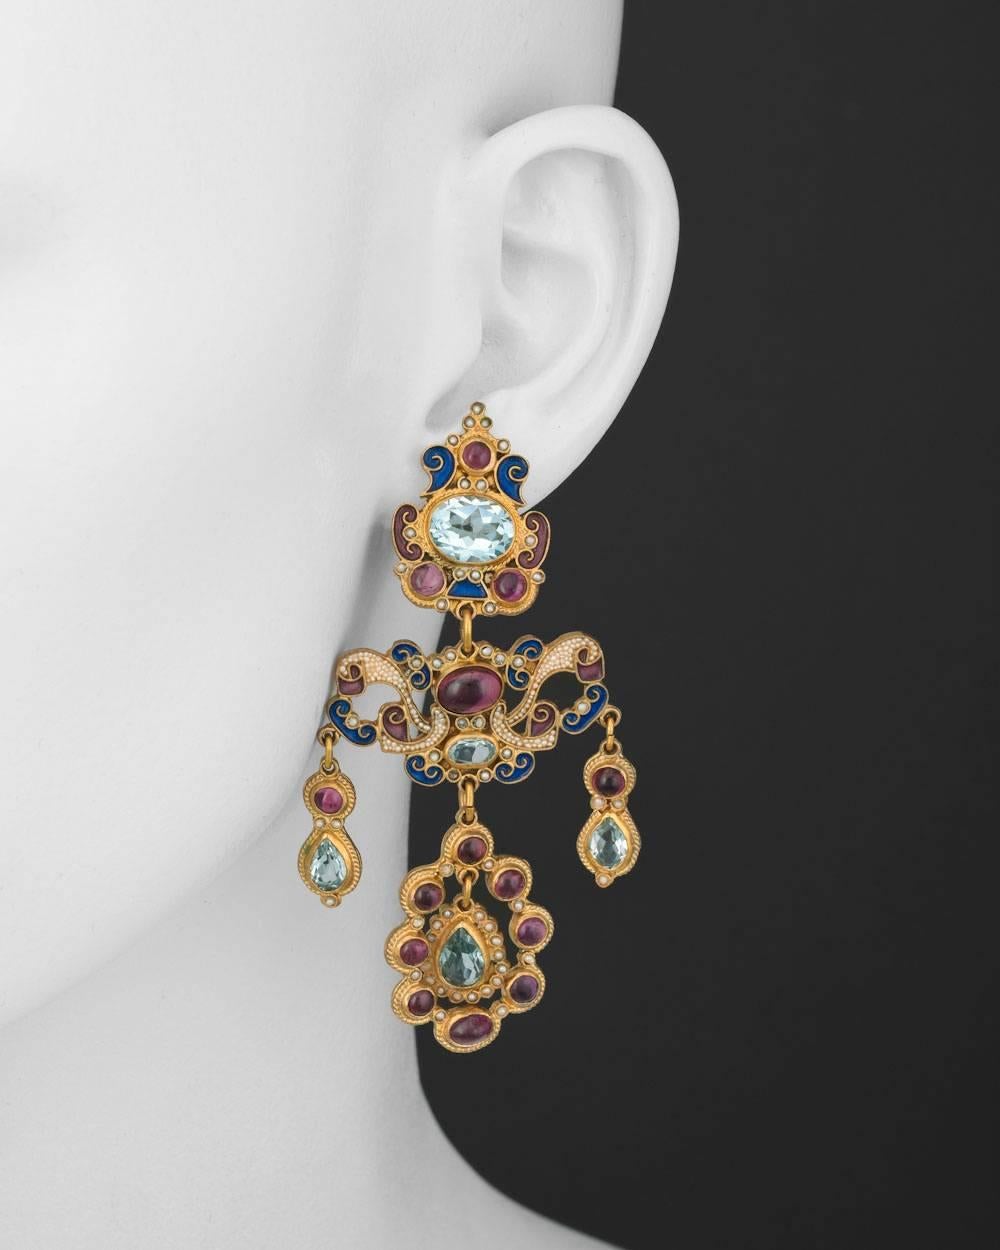 Gem-set and enamel chandelier earrings, accented by vari-shaped faceted aquamarines, cabochon-cut pink tourmalines, seed pearls and blue enamel, mounted in gold-plated silver, with clip and post backs, signed Percossi Papi, Rome. 3.05